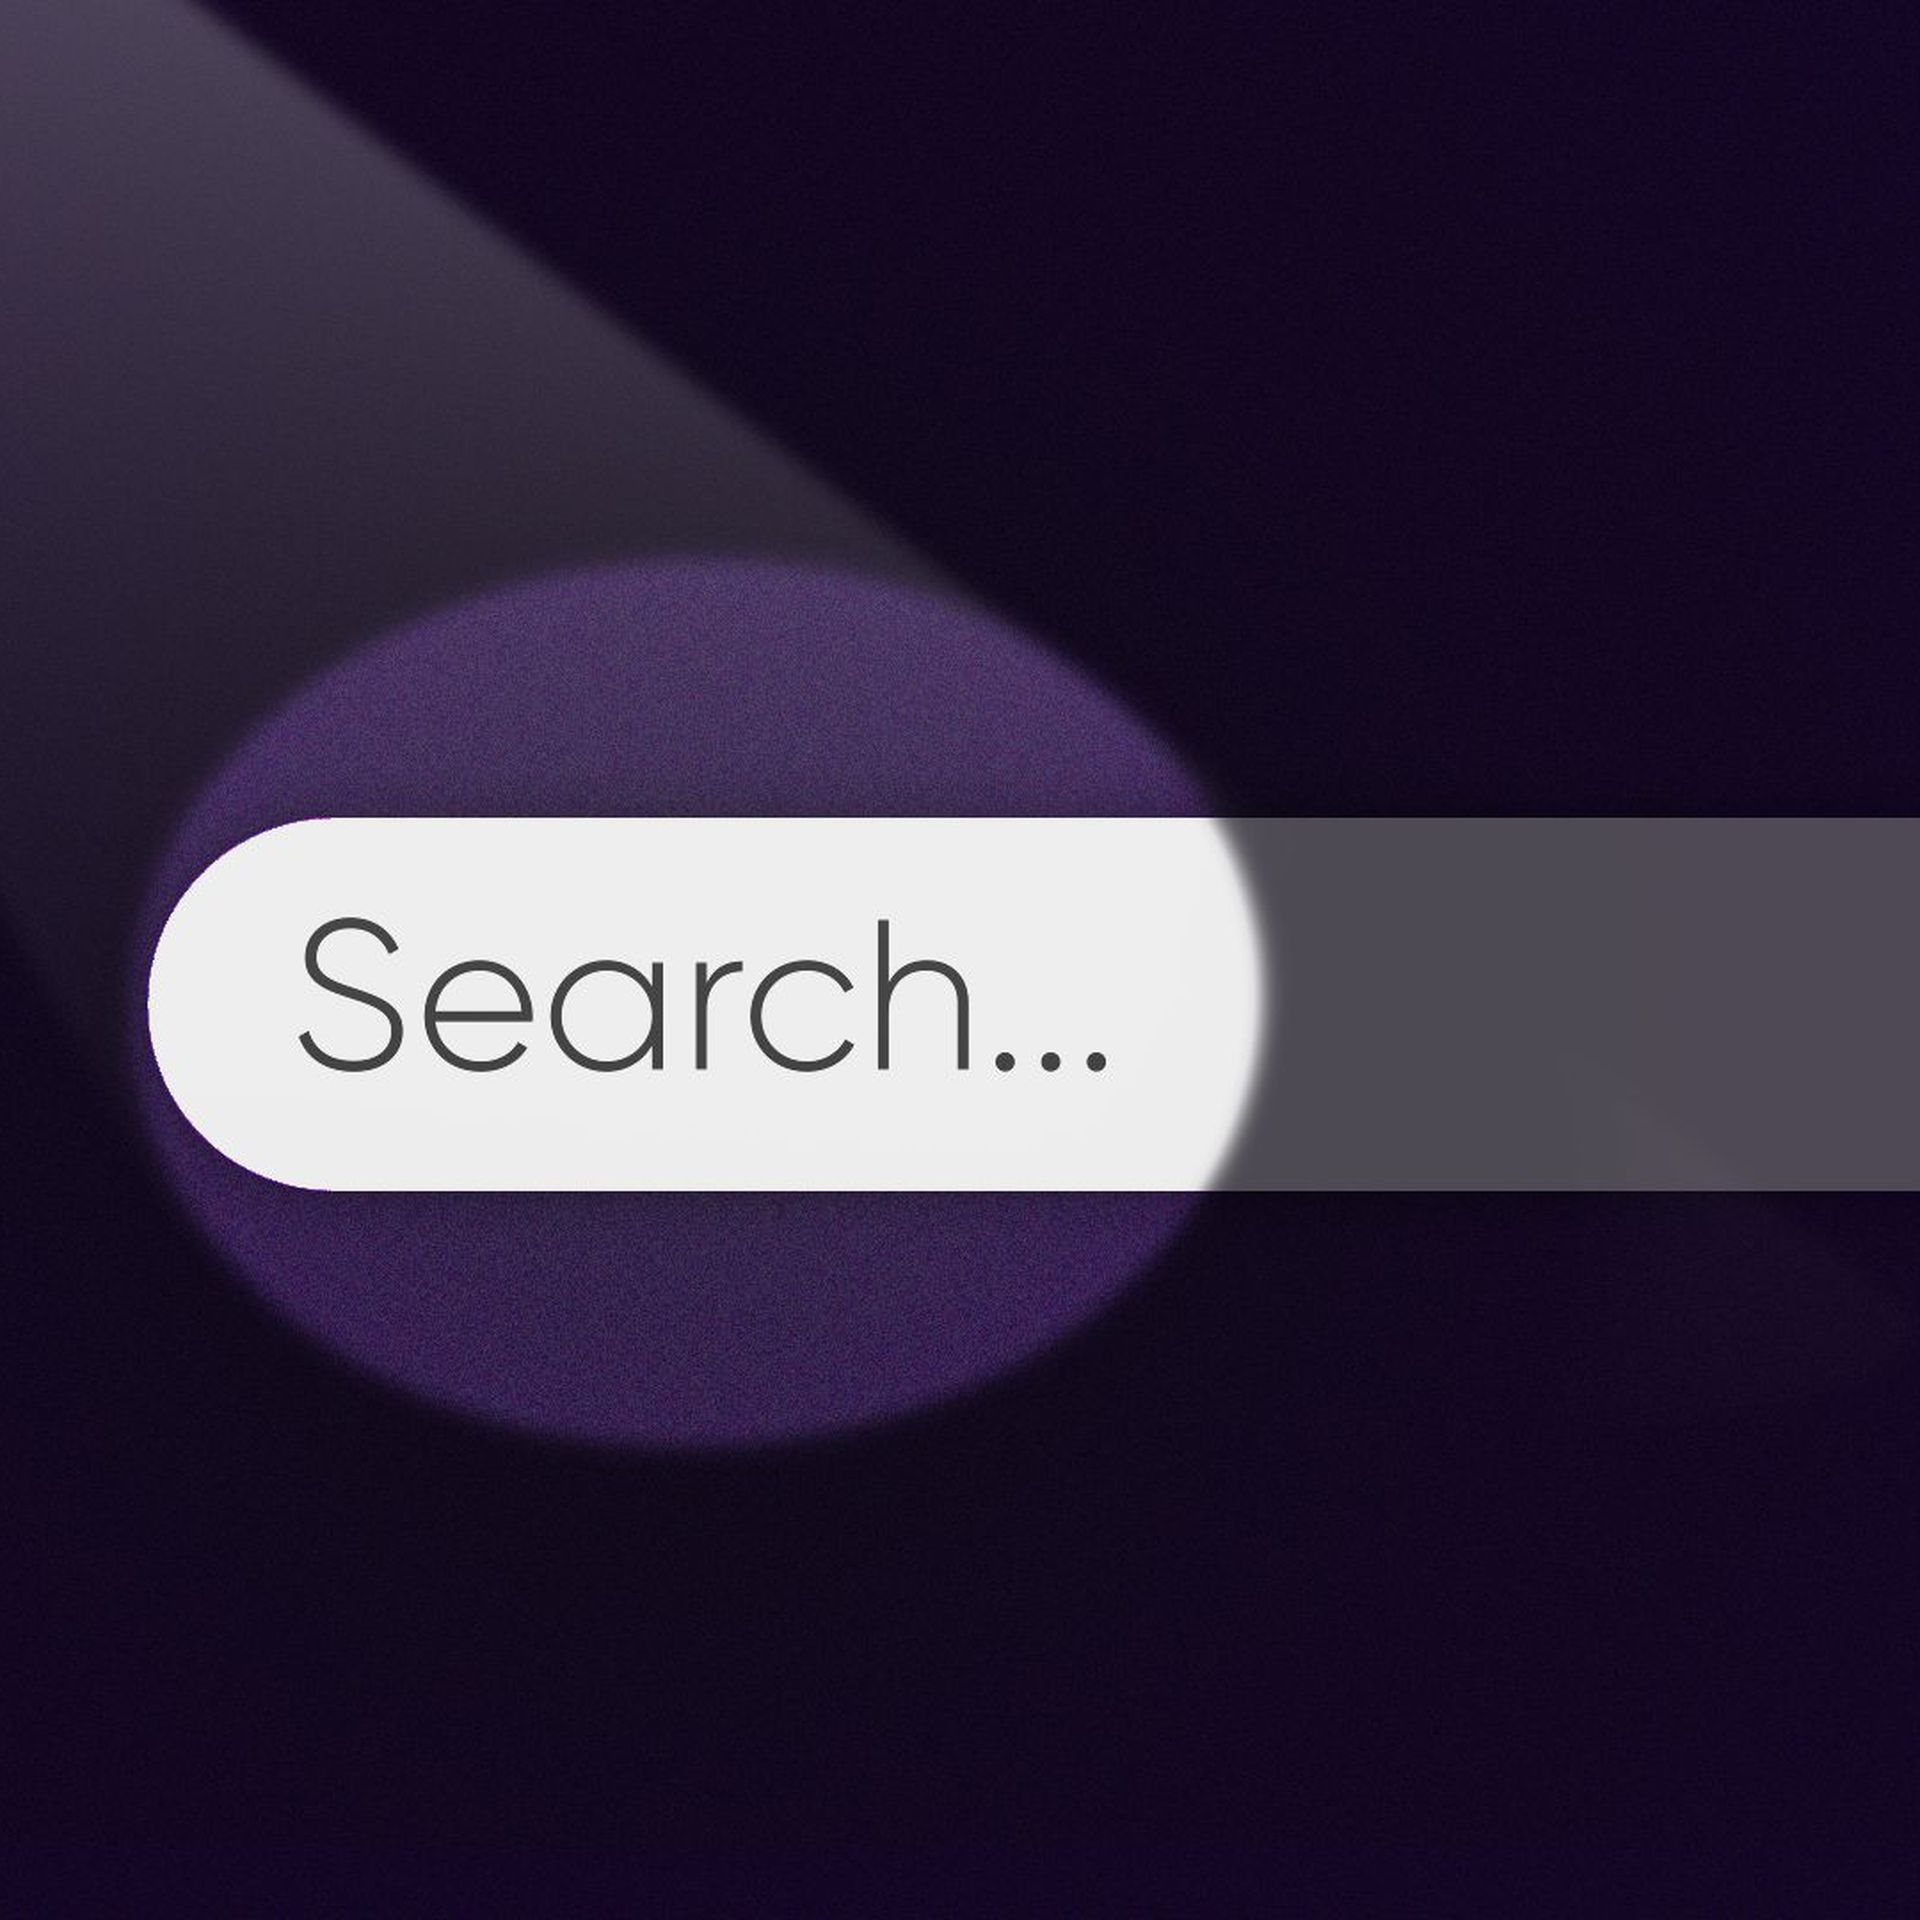 Illustration of a search bar being illuminated by a spotlight.